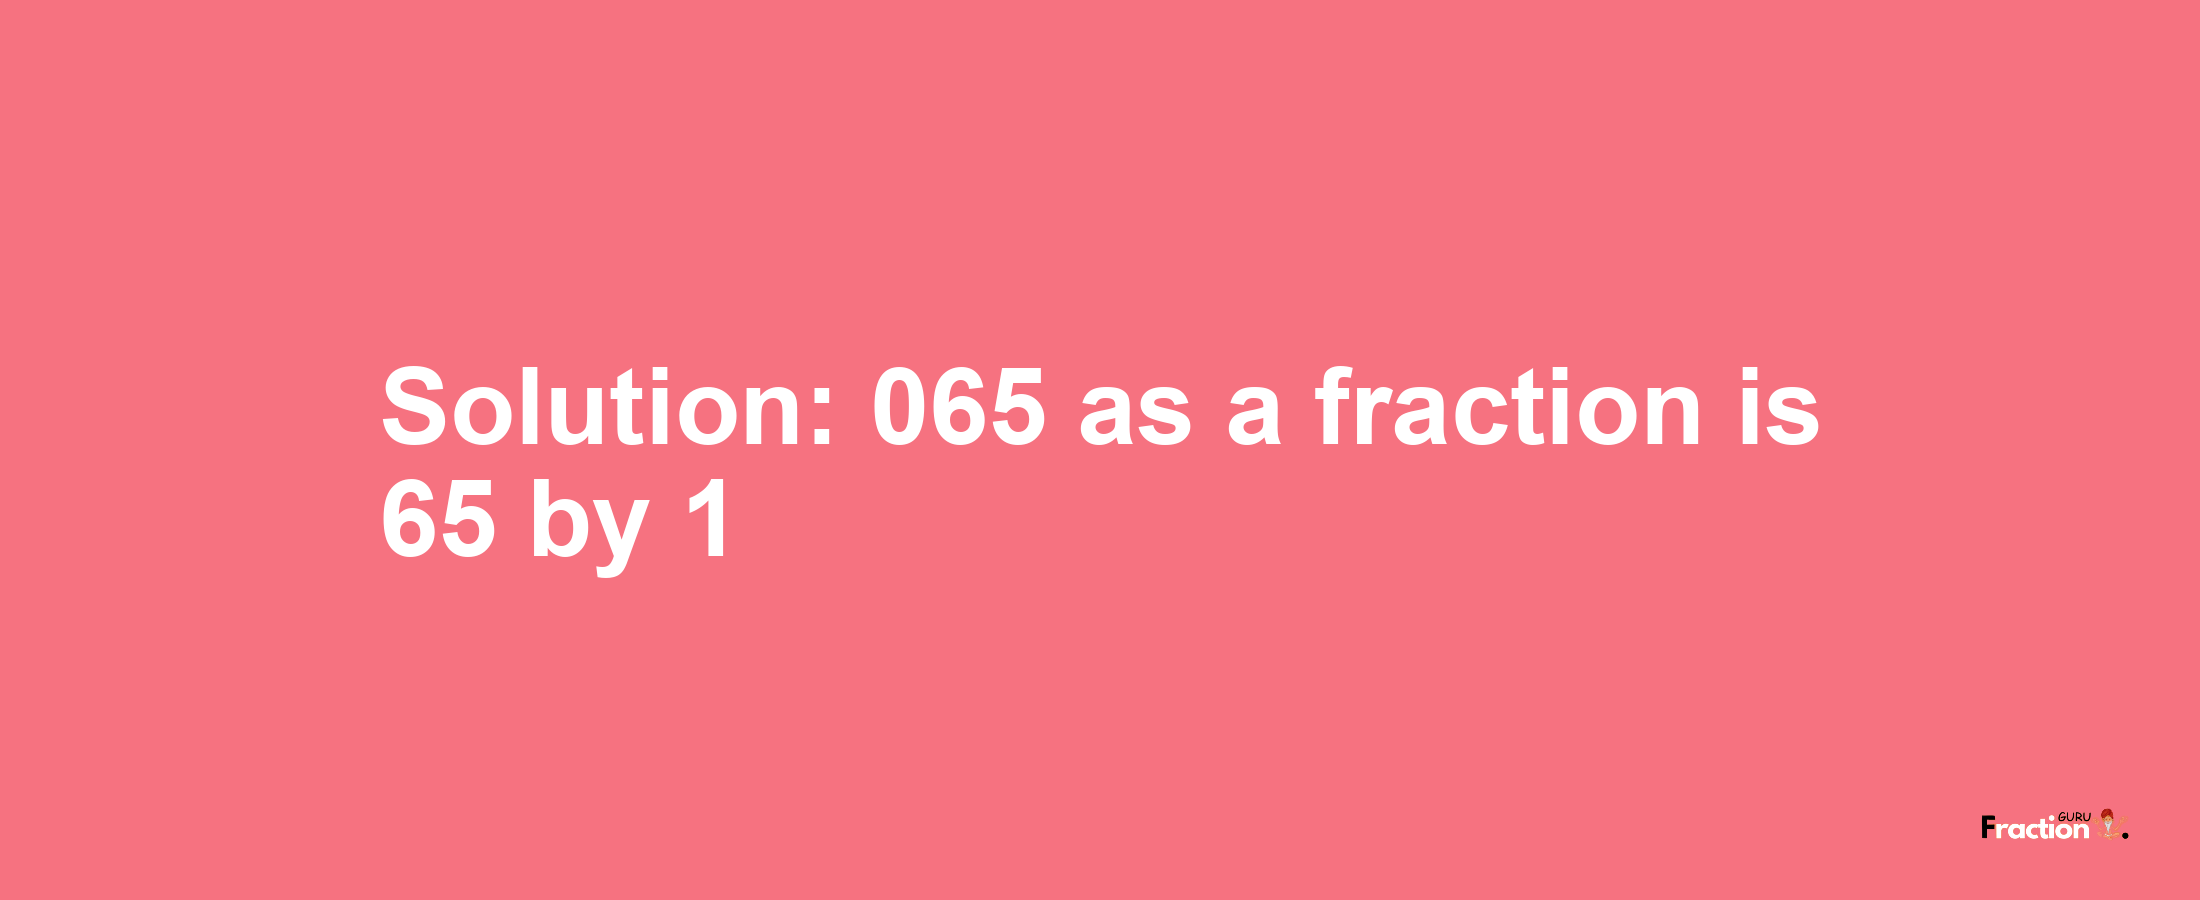 Solution:065 as a fraction is 65/1